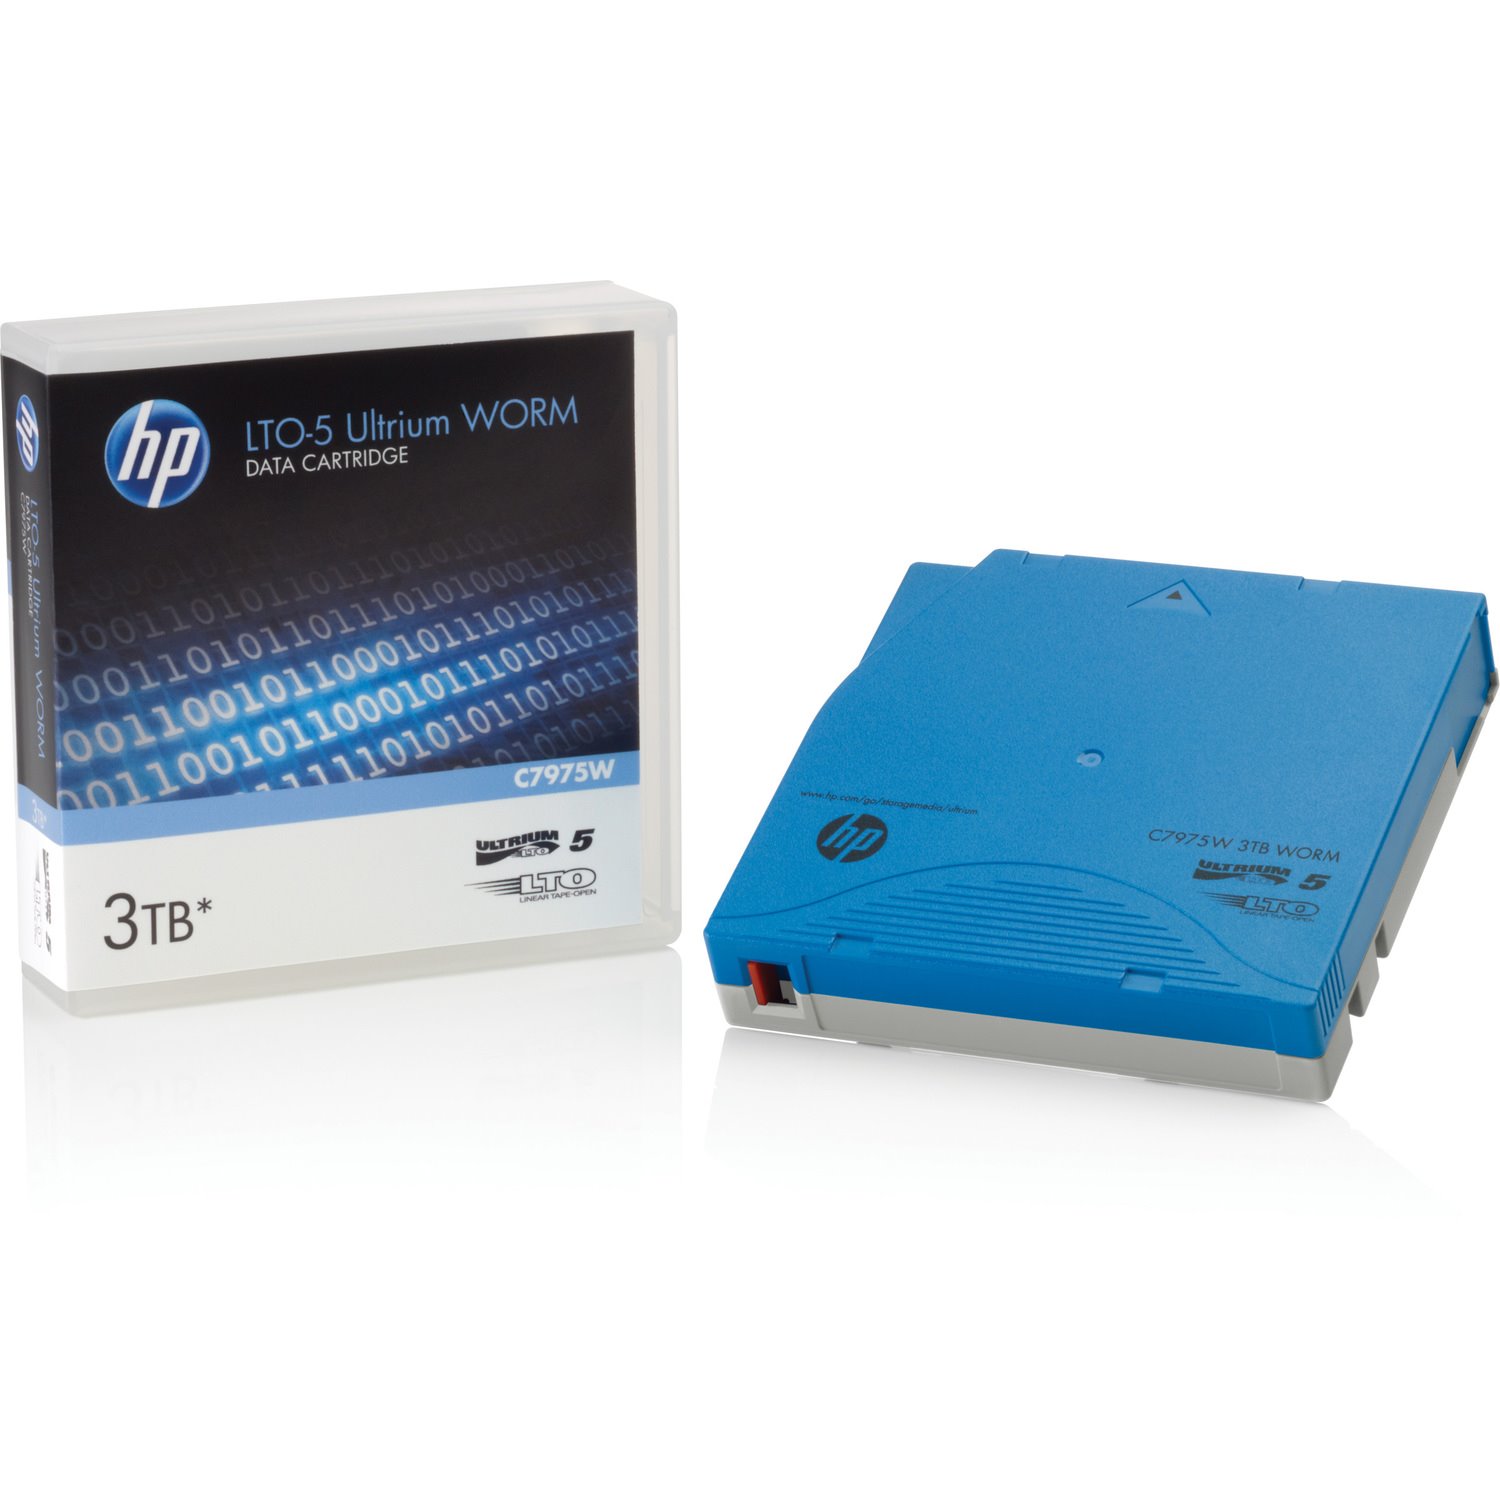 HP-IMSourcing C7975WL LTO Ultrium 5 WORM Data Cartridge with Barcode Labeling